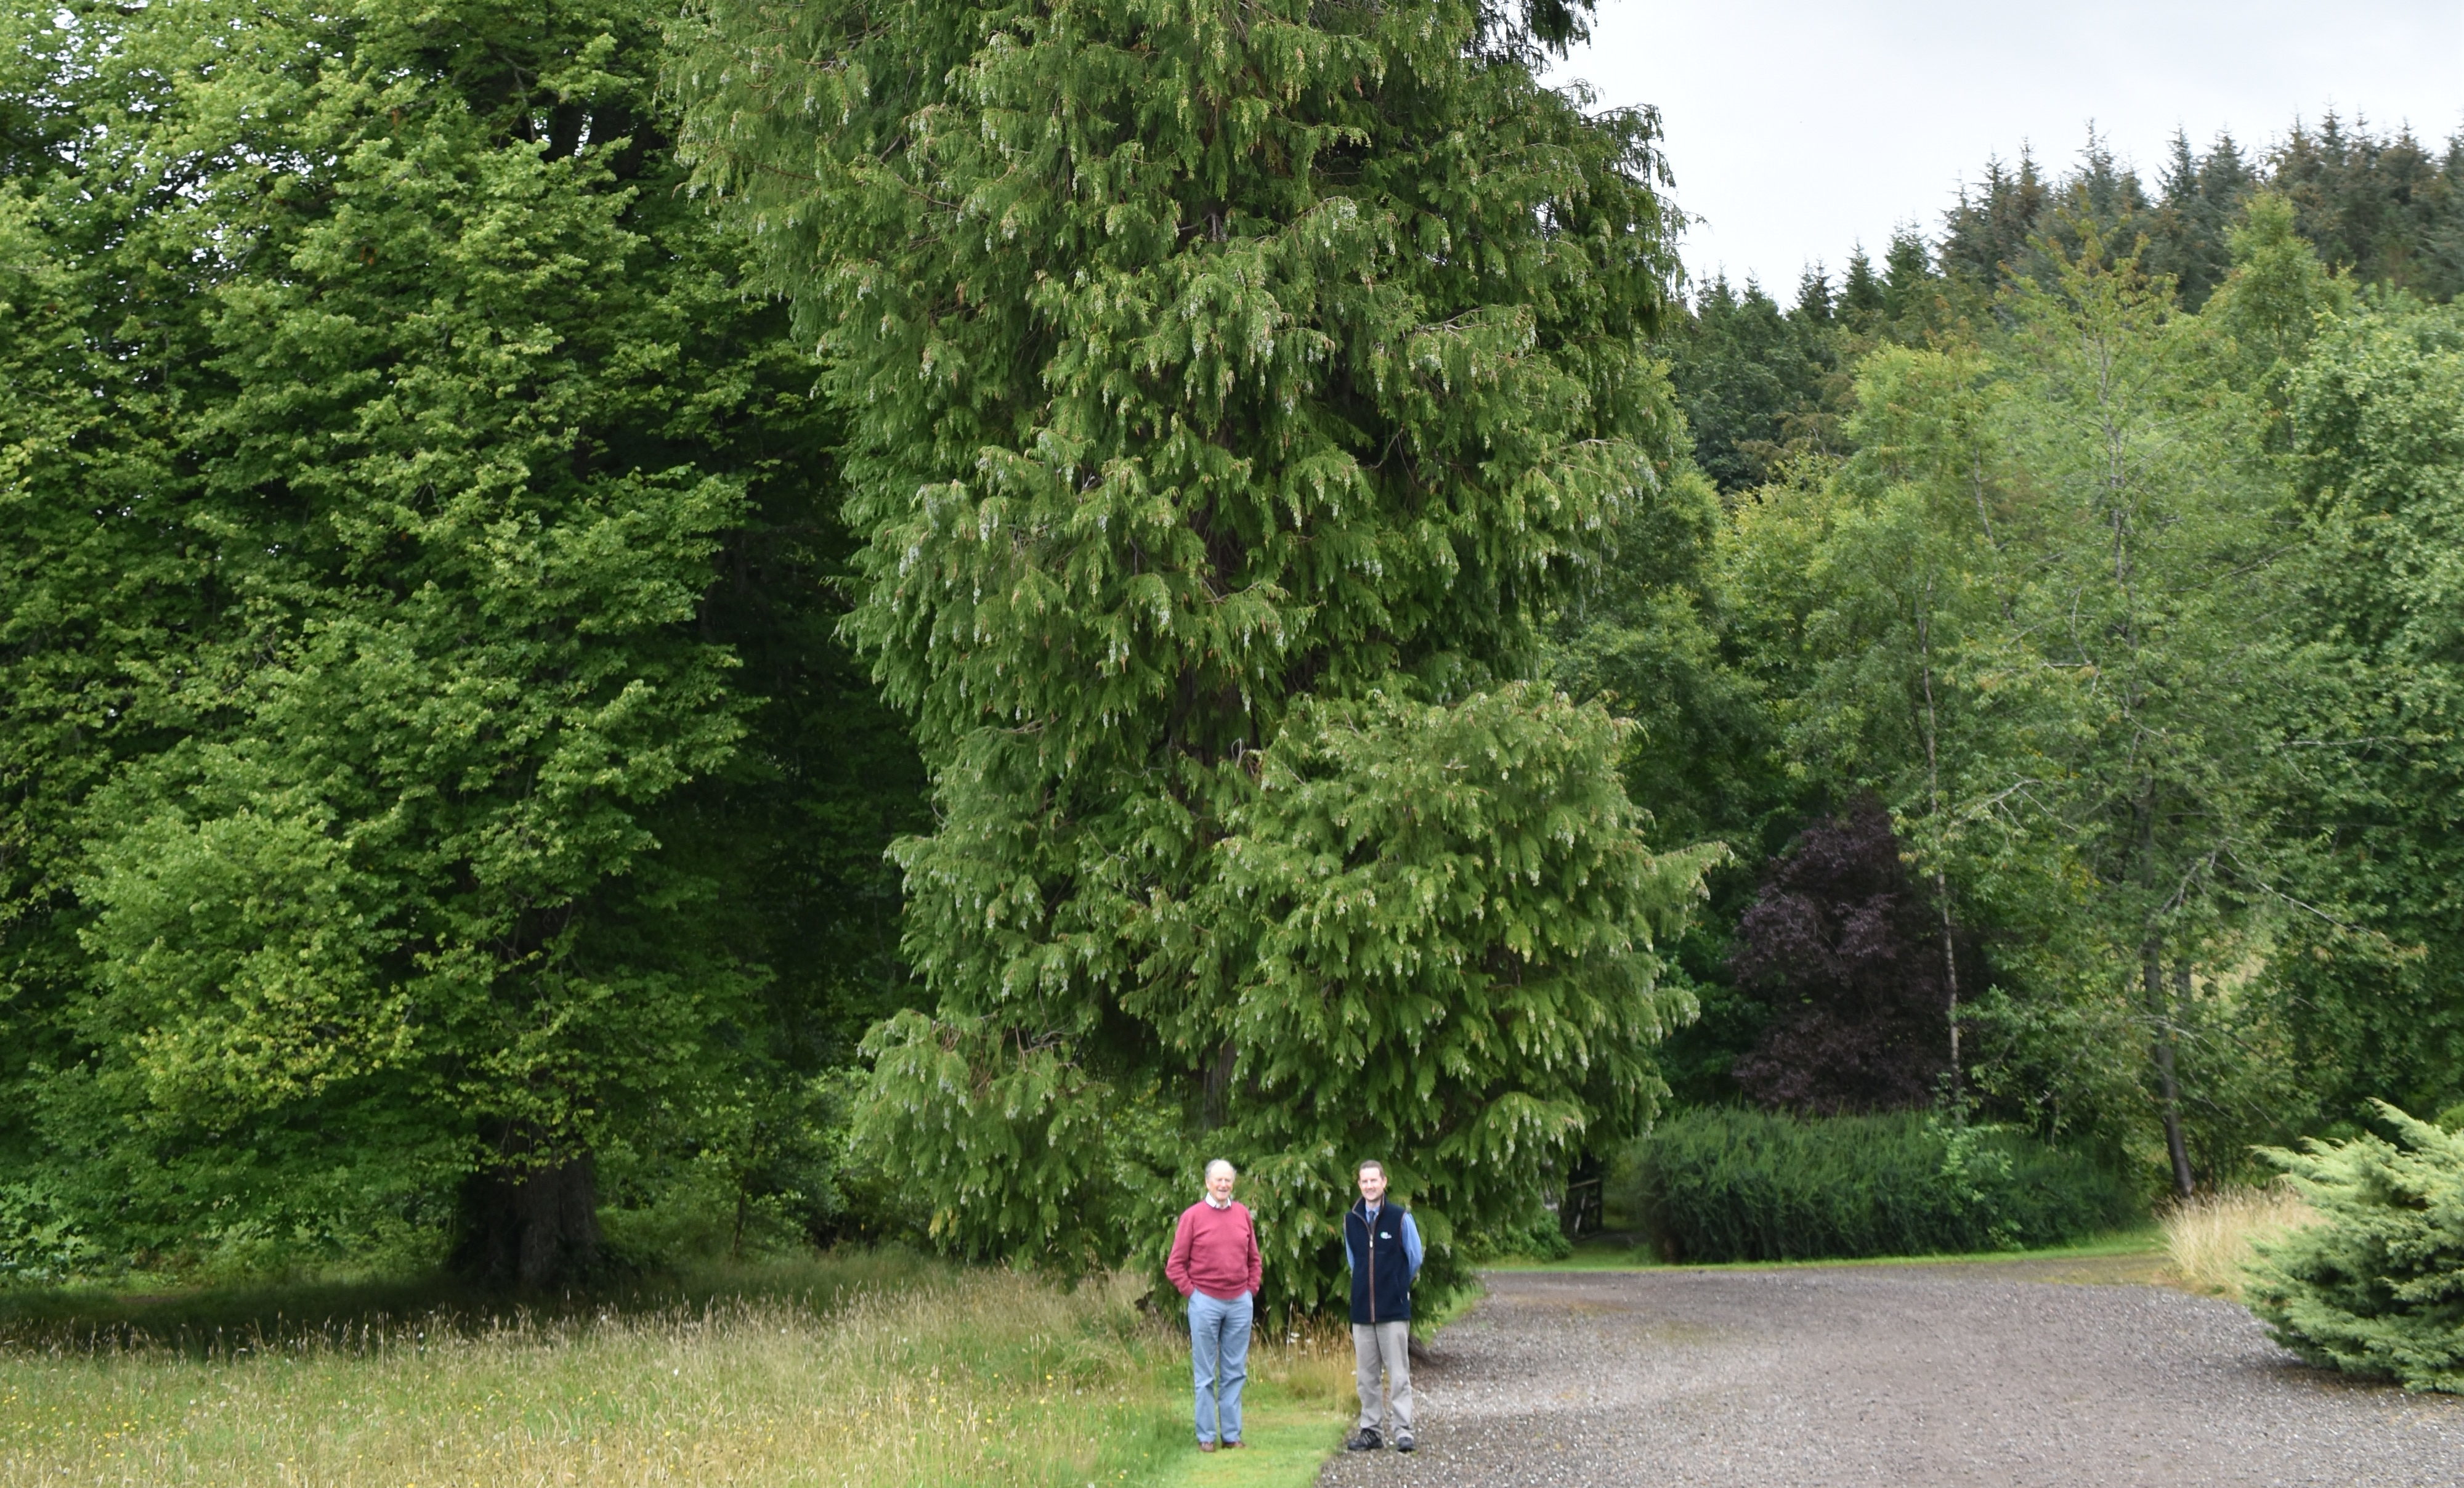 The tallest Leylandii tree in Scotland has been discovered in Gleneagles